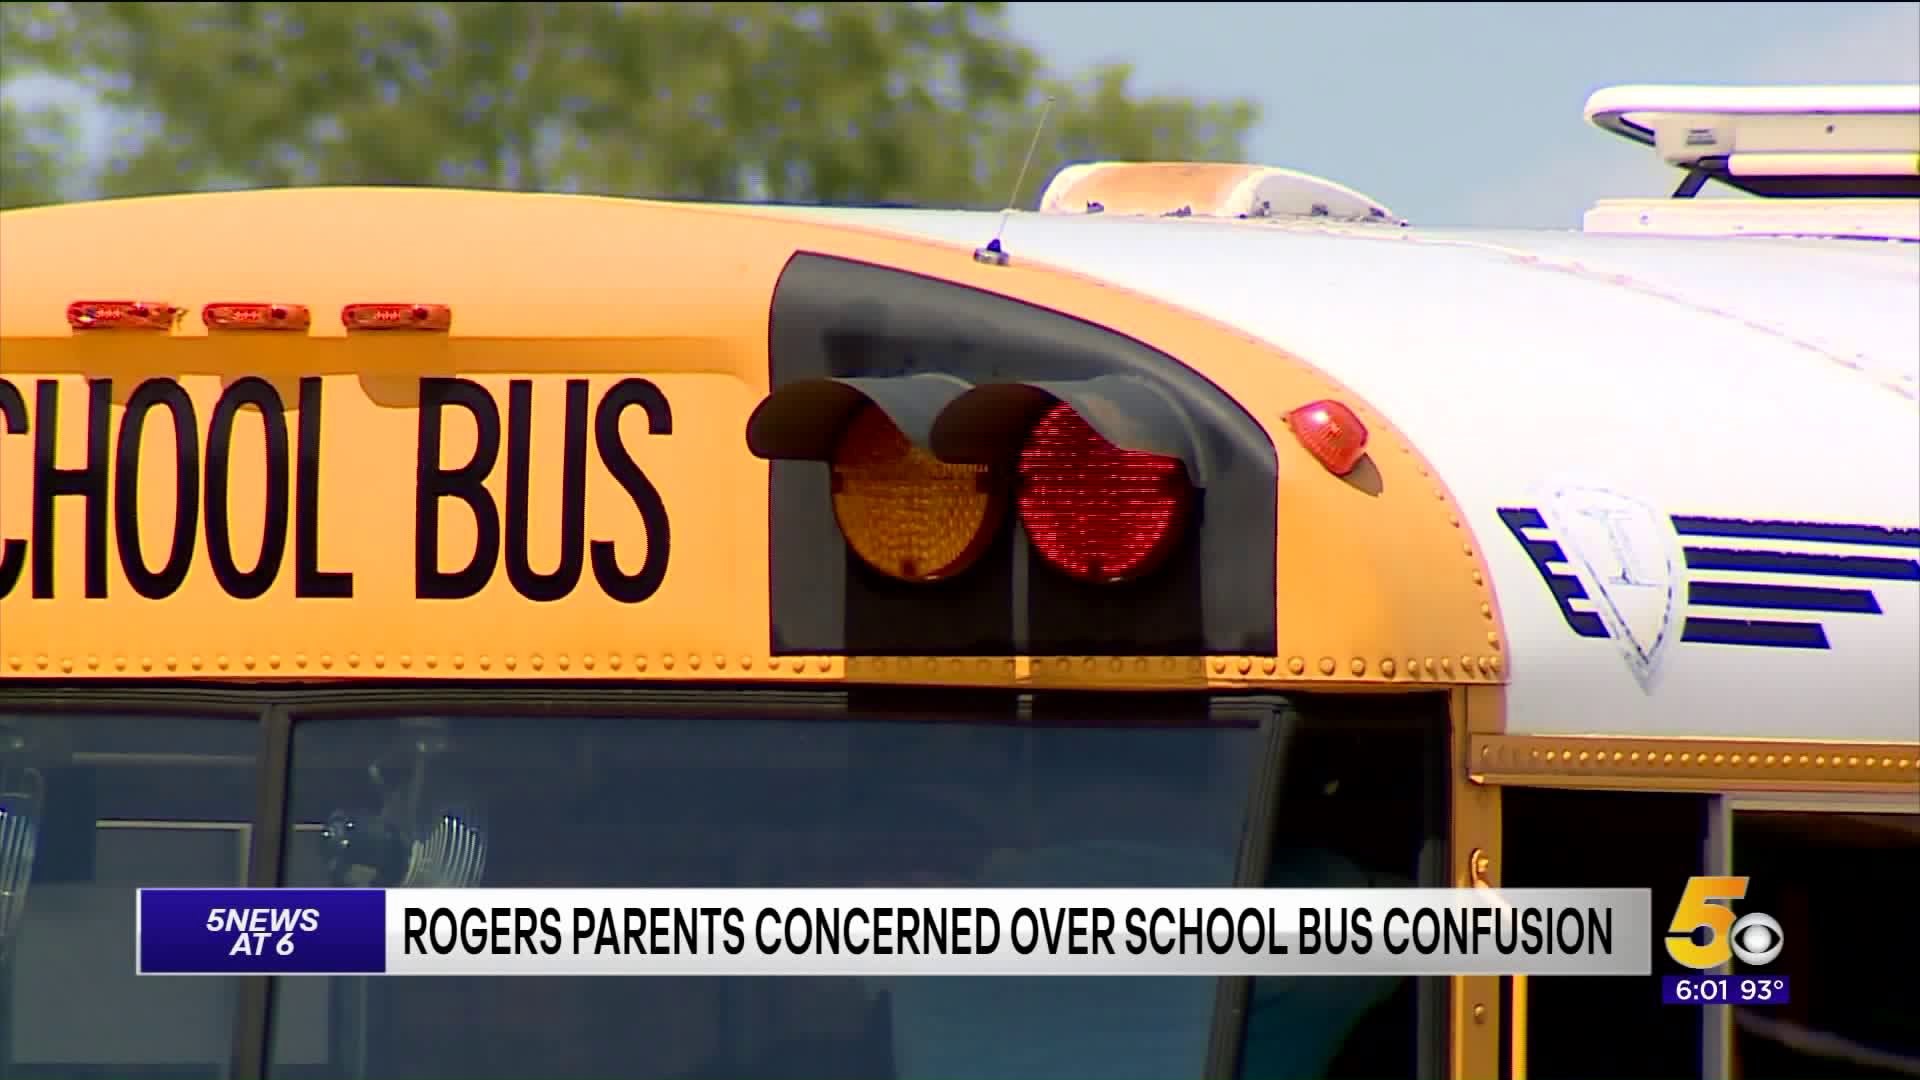 Rogers Parents Concerned Over School Bus Confusion